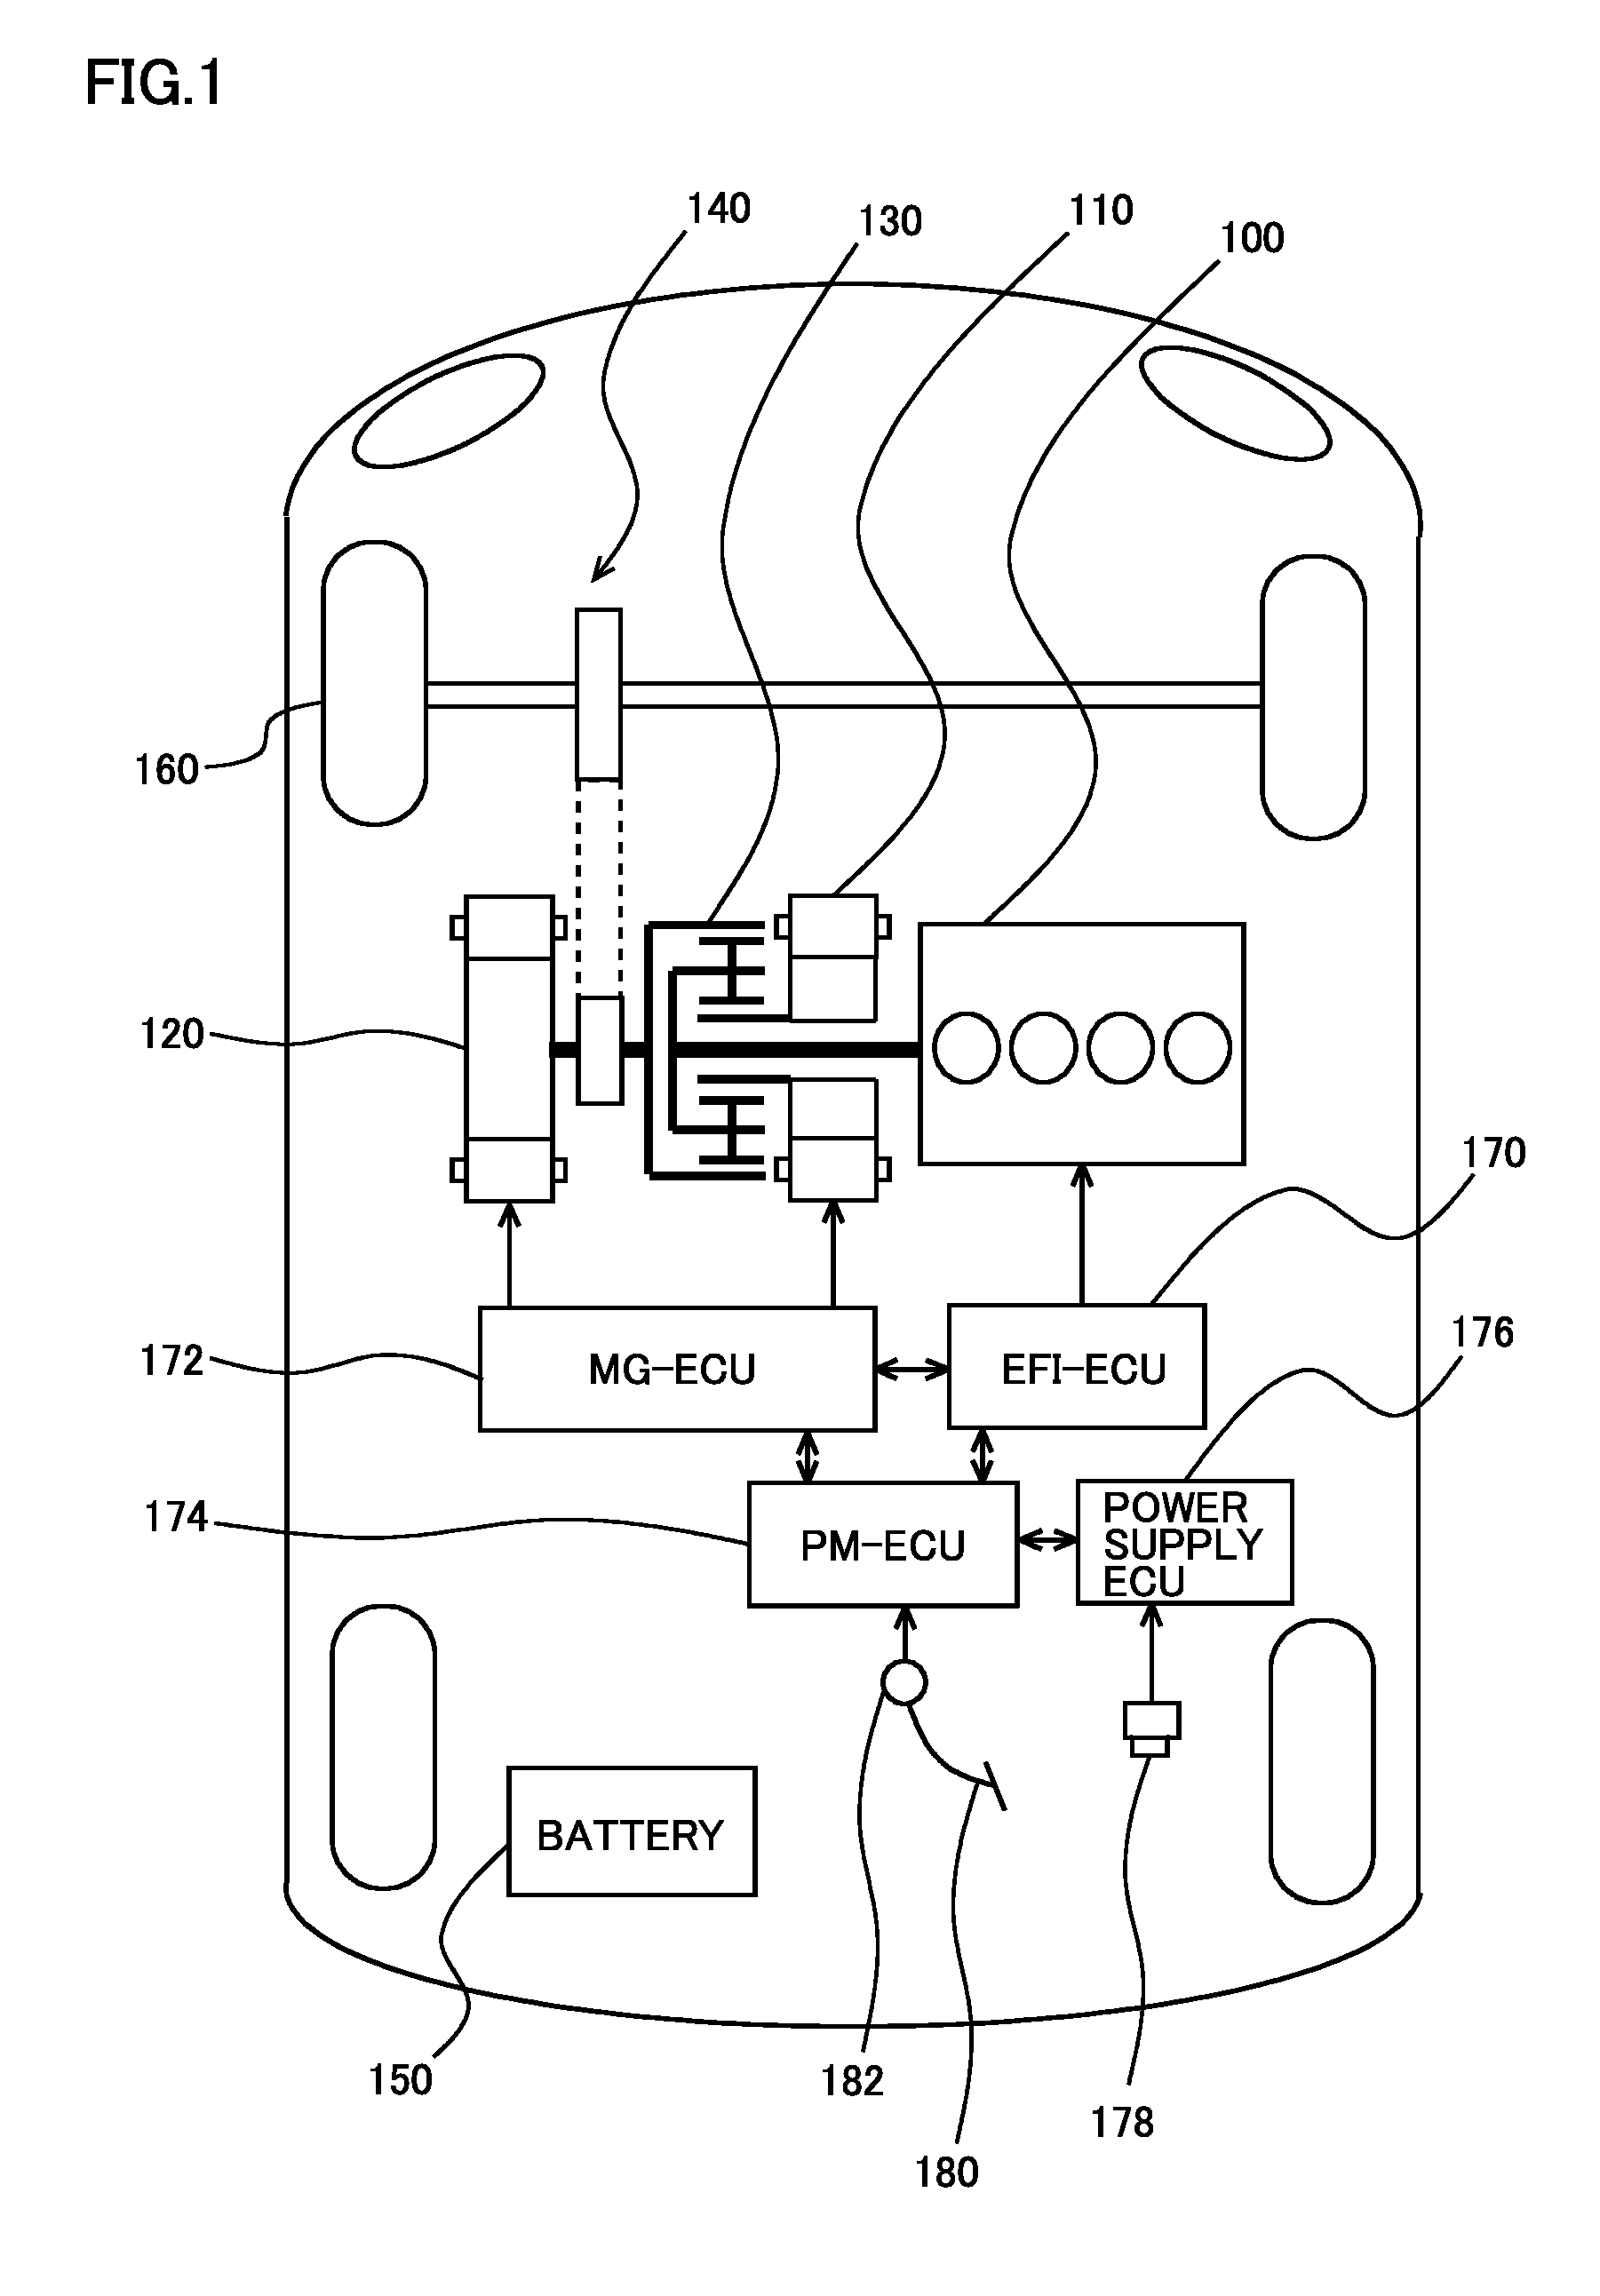 Control system of vehicle